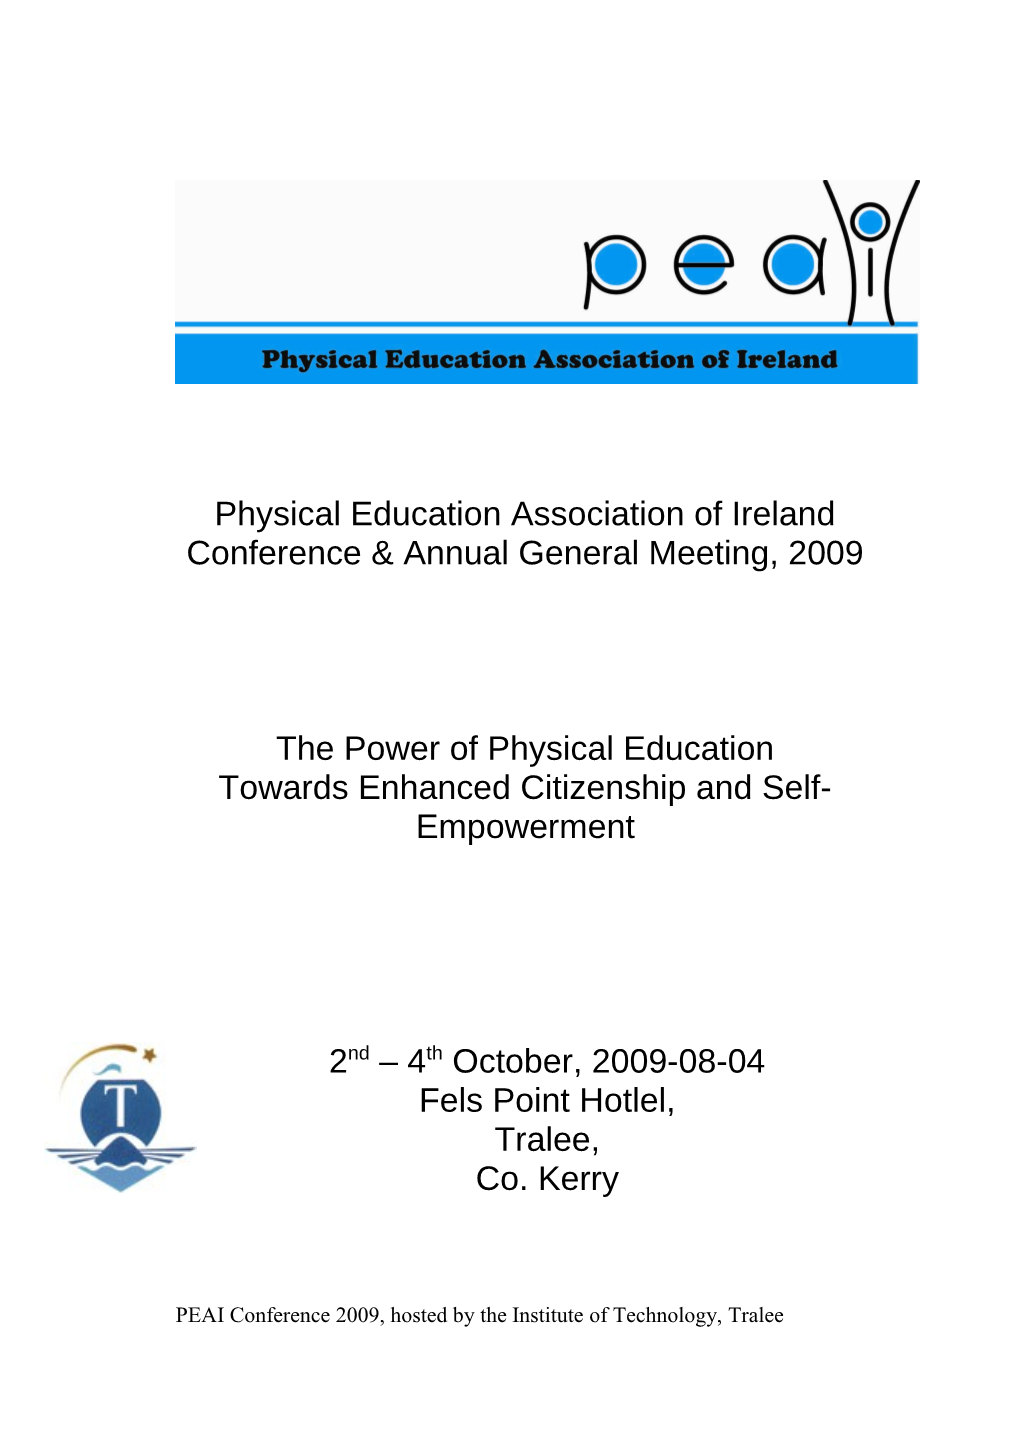 Physical Education Association of Ireland Conference & Annual General Meeting, 2009